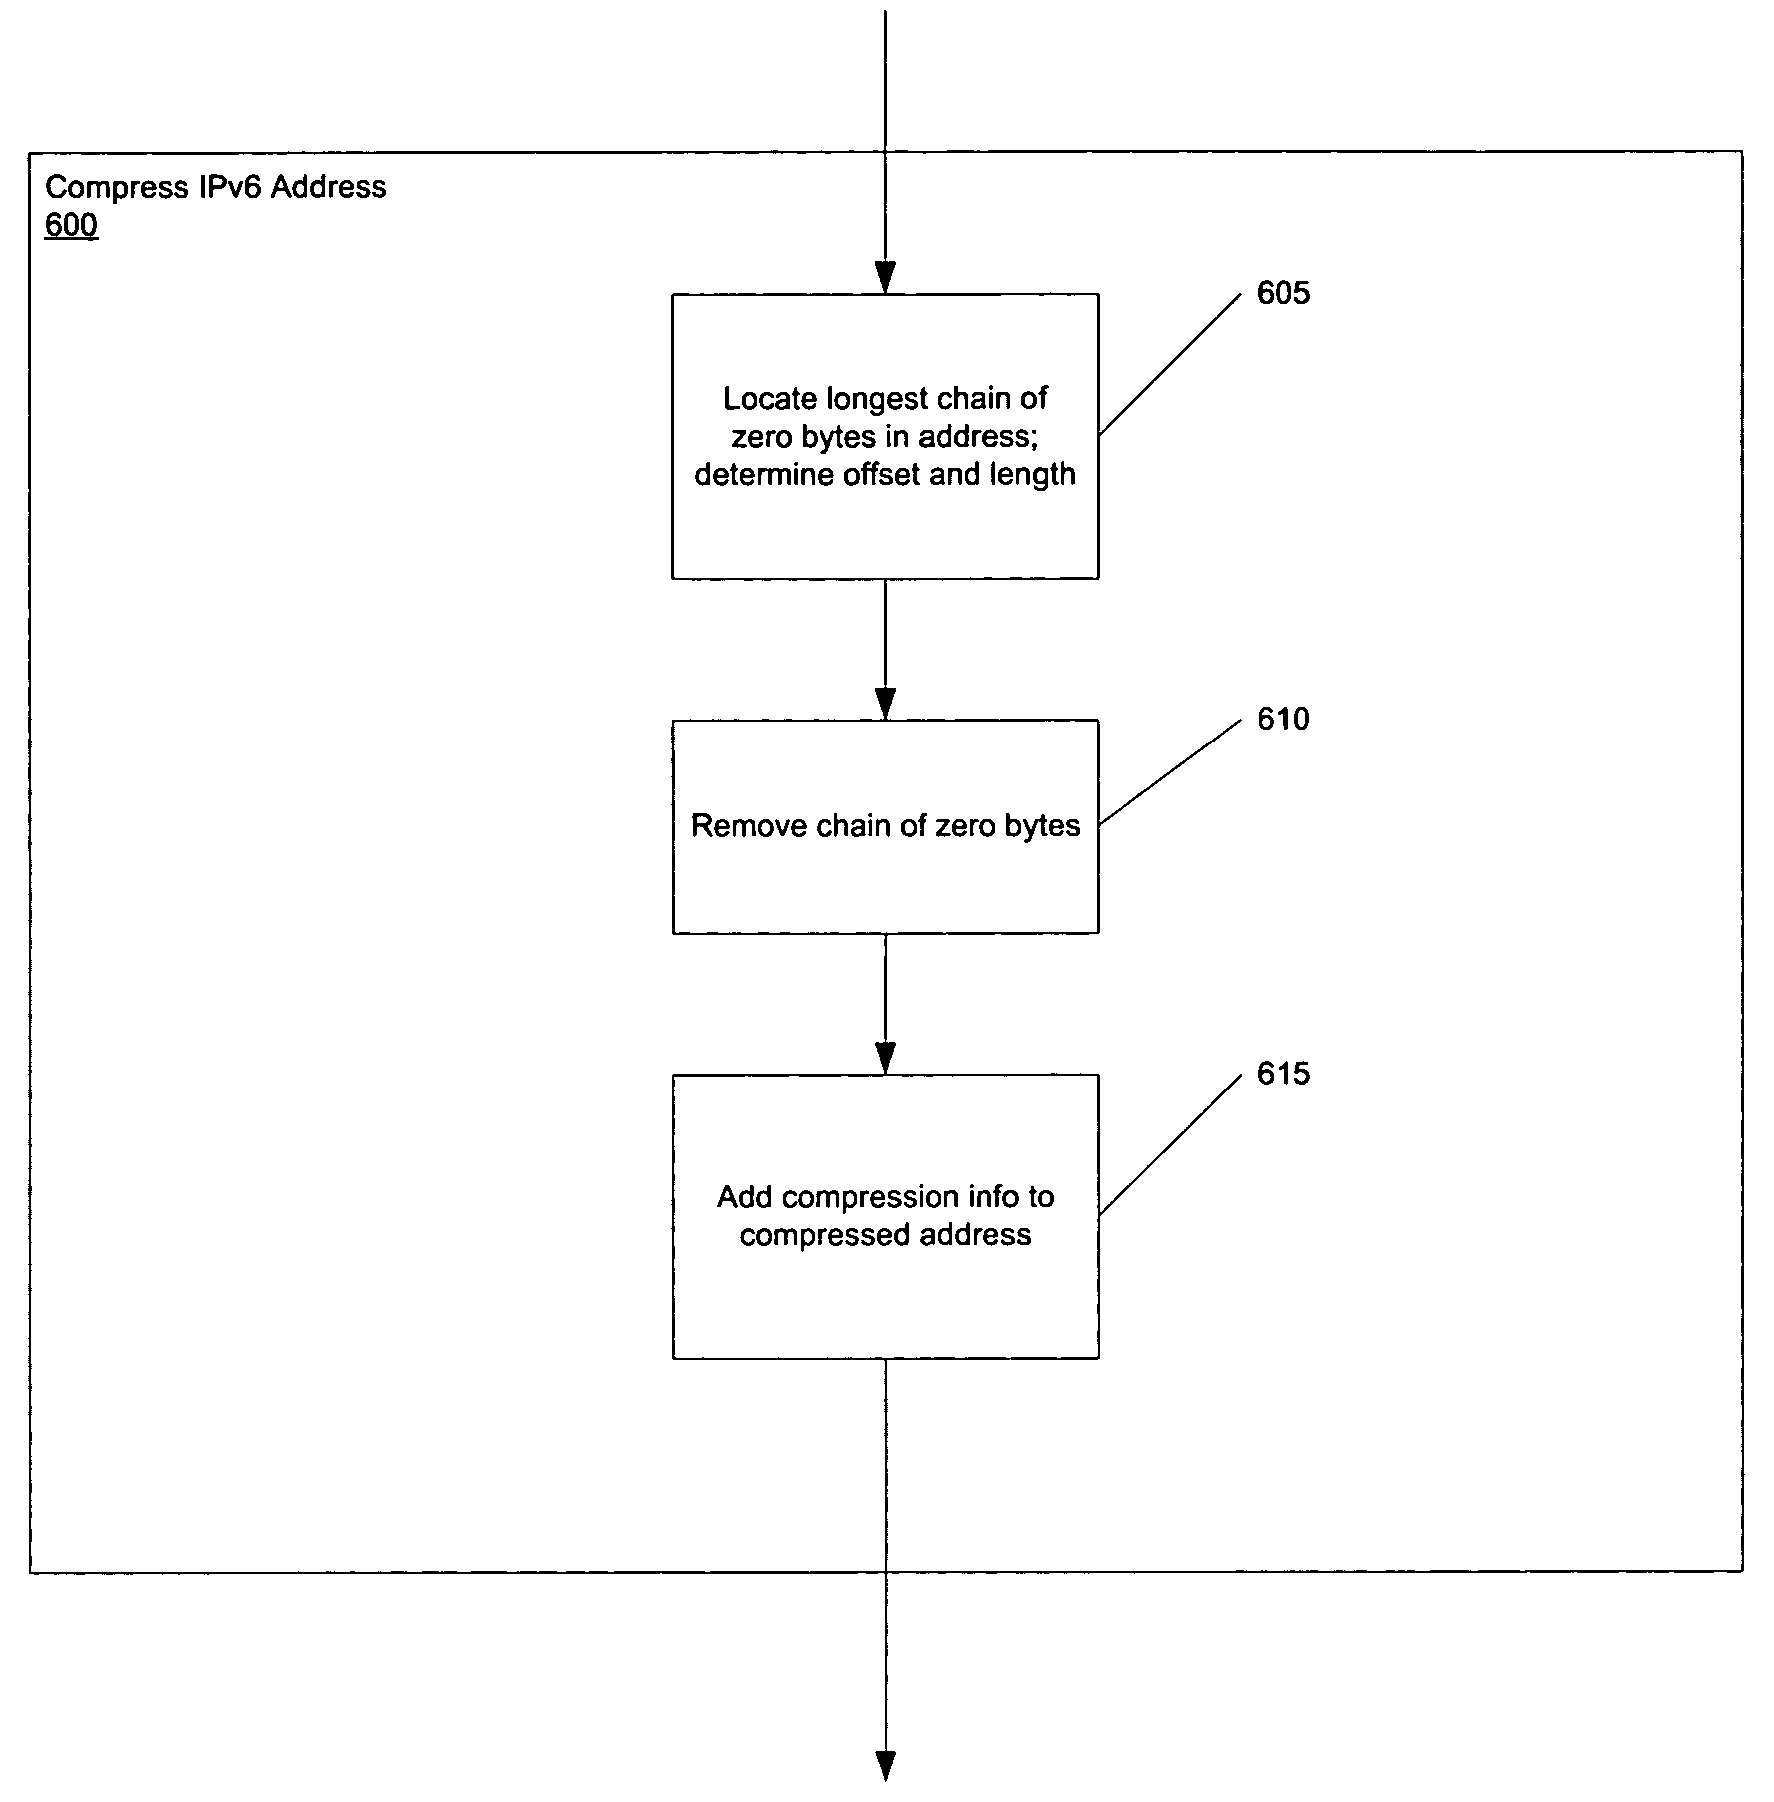 System and method for efficient sftorage and processing of IPV6 addresses